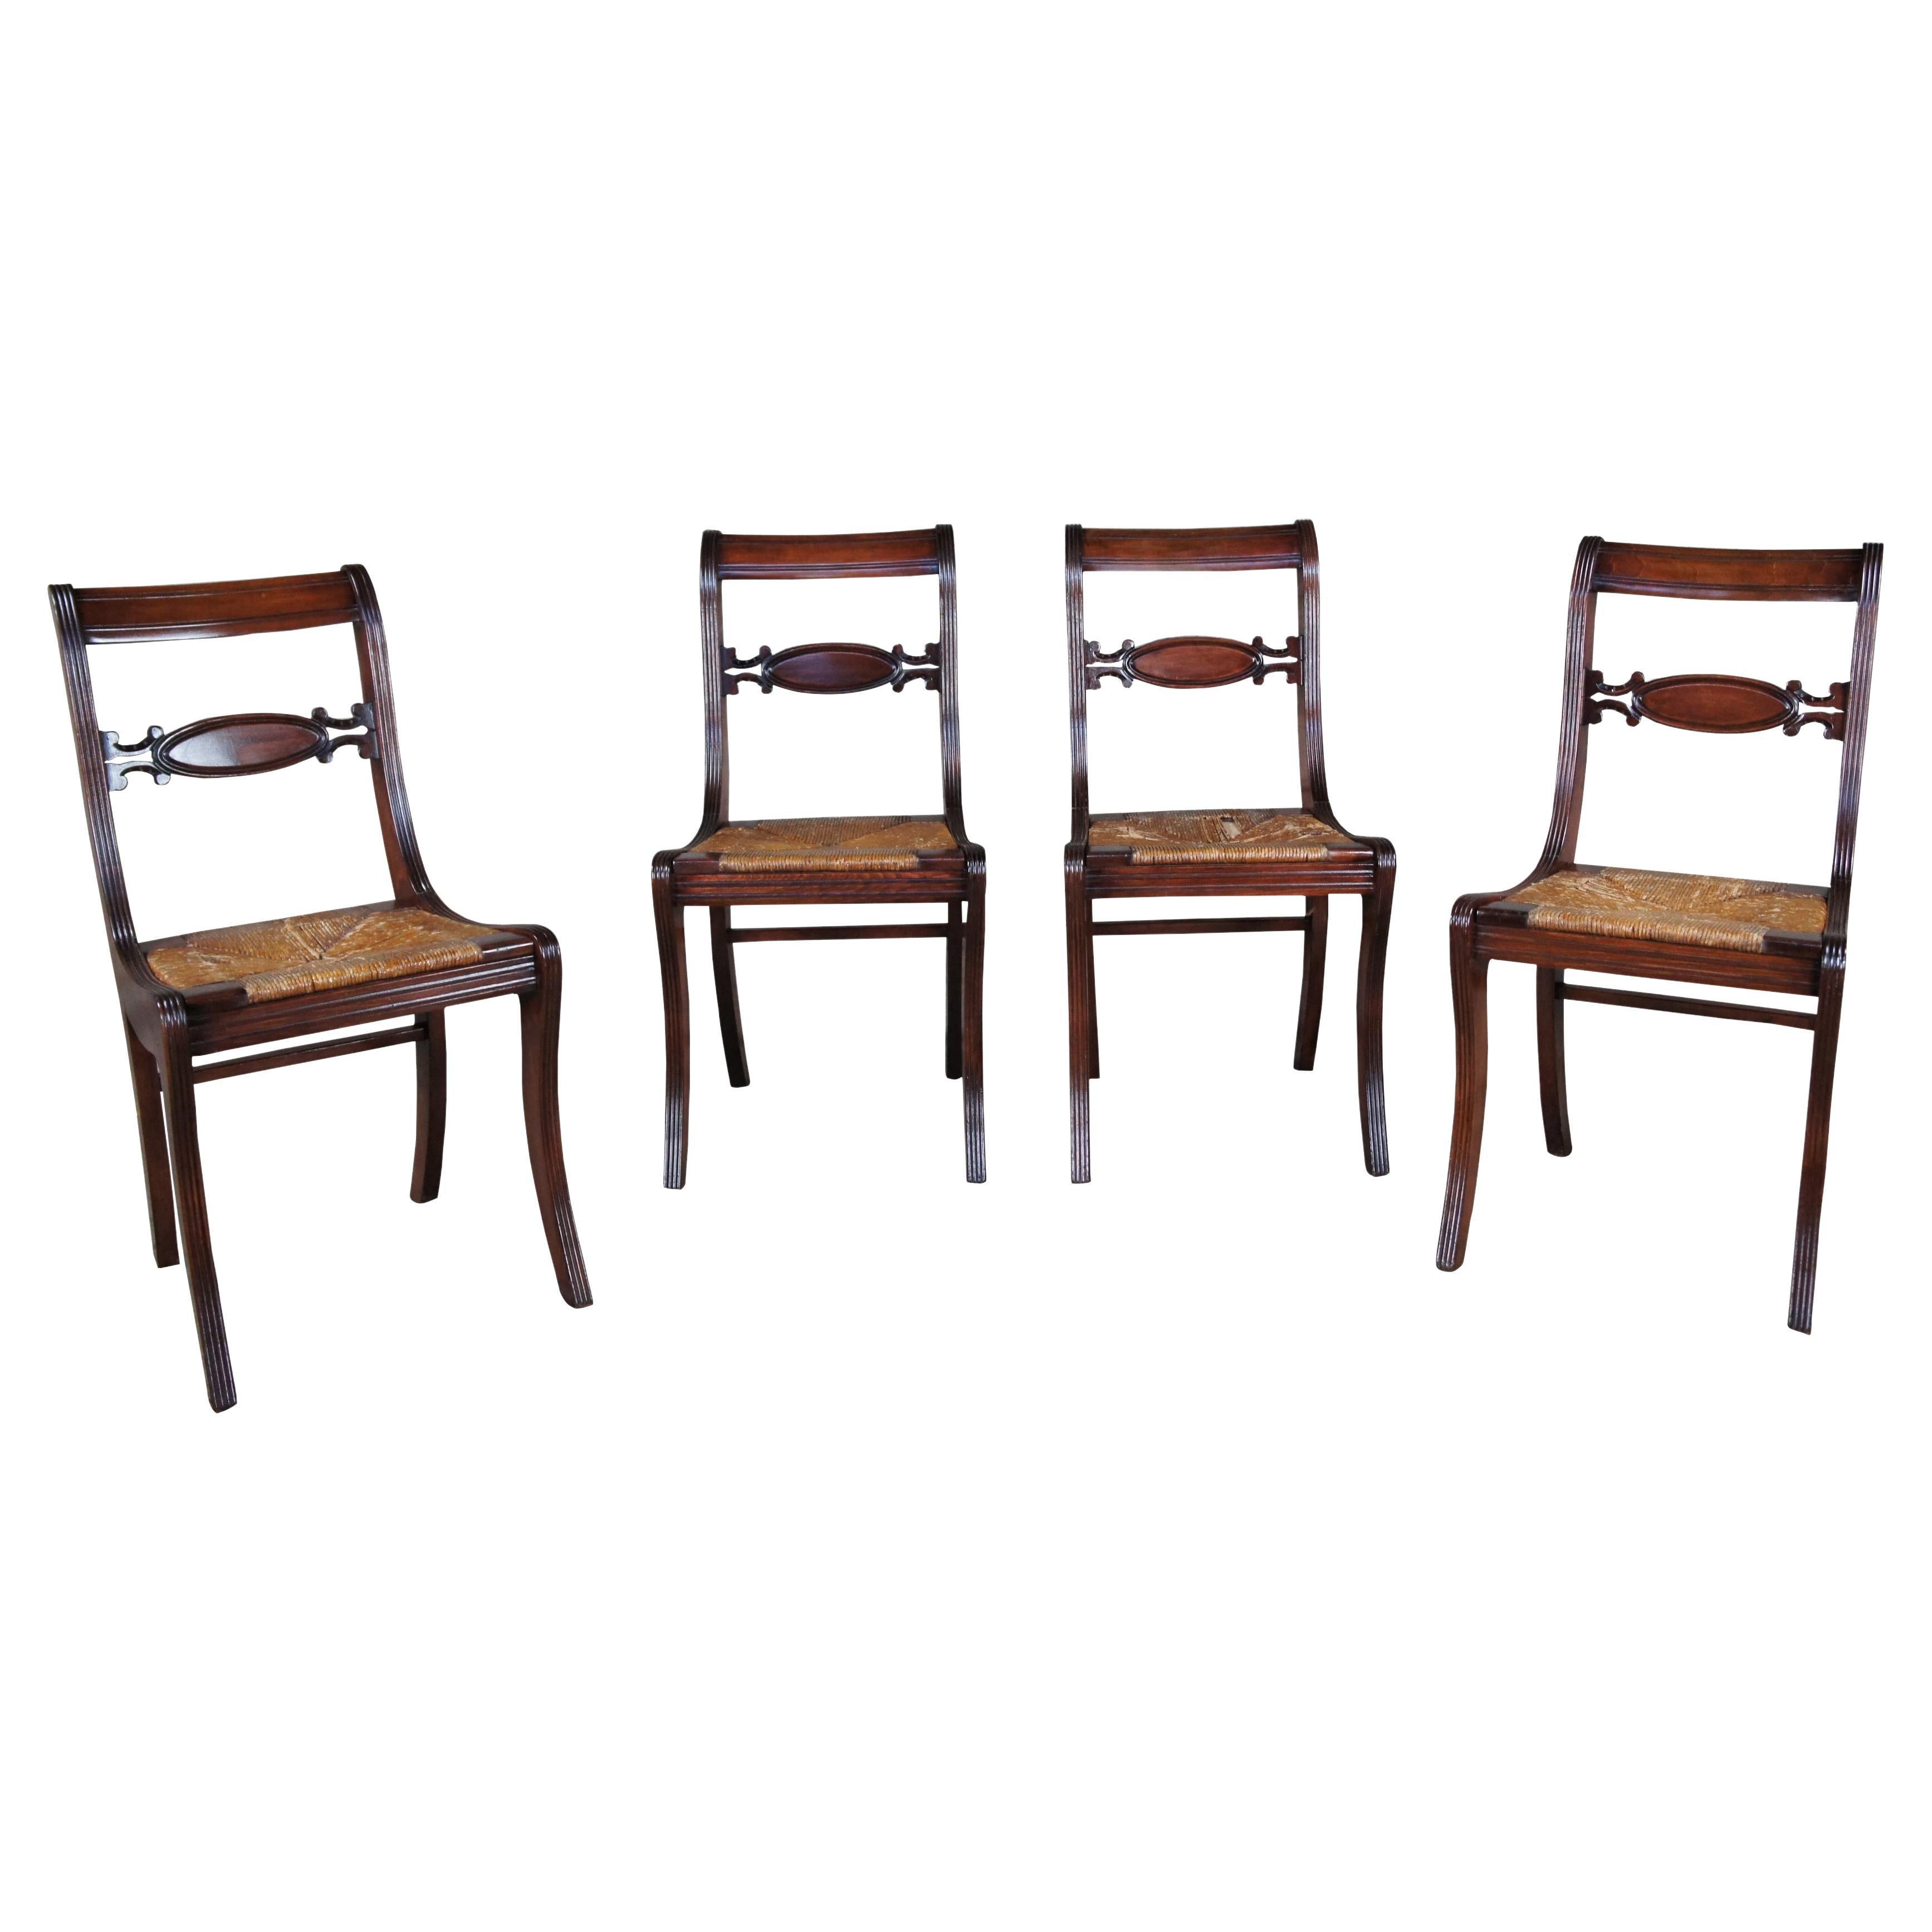 4 Antique Duncan Phyfe Regency Style Dining Accent Chairs Rush Seat Klismos Form